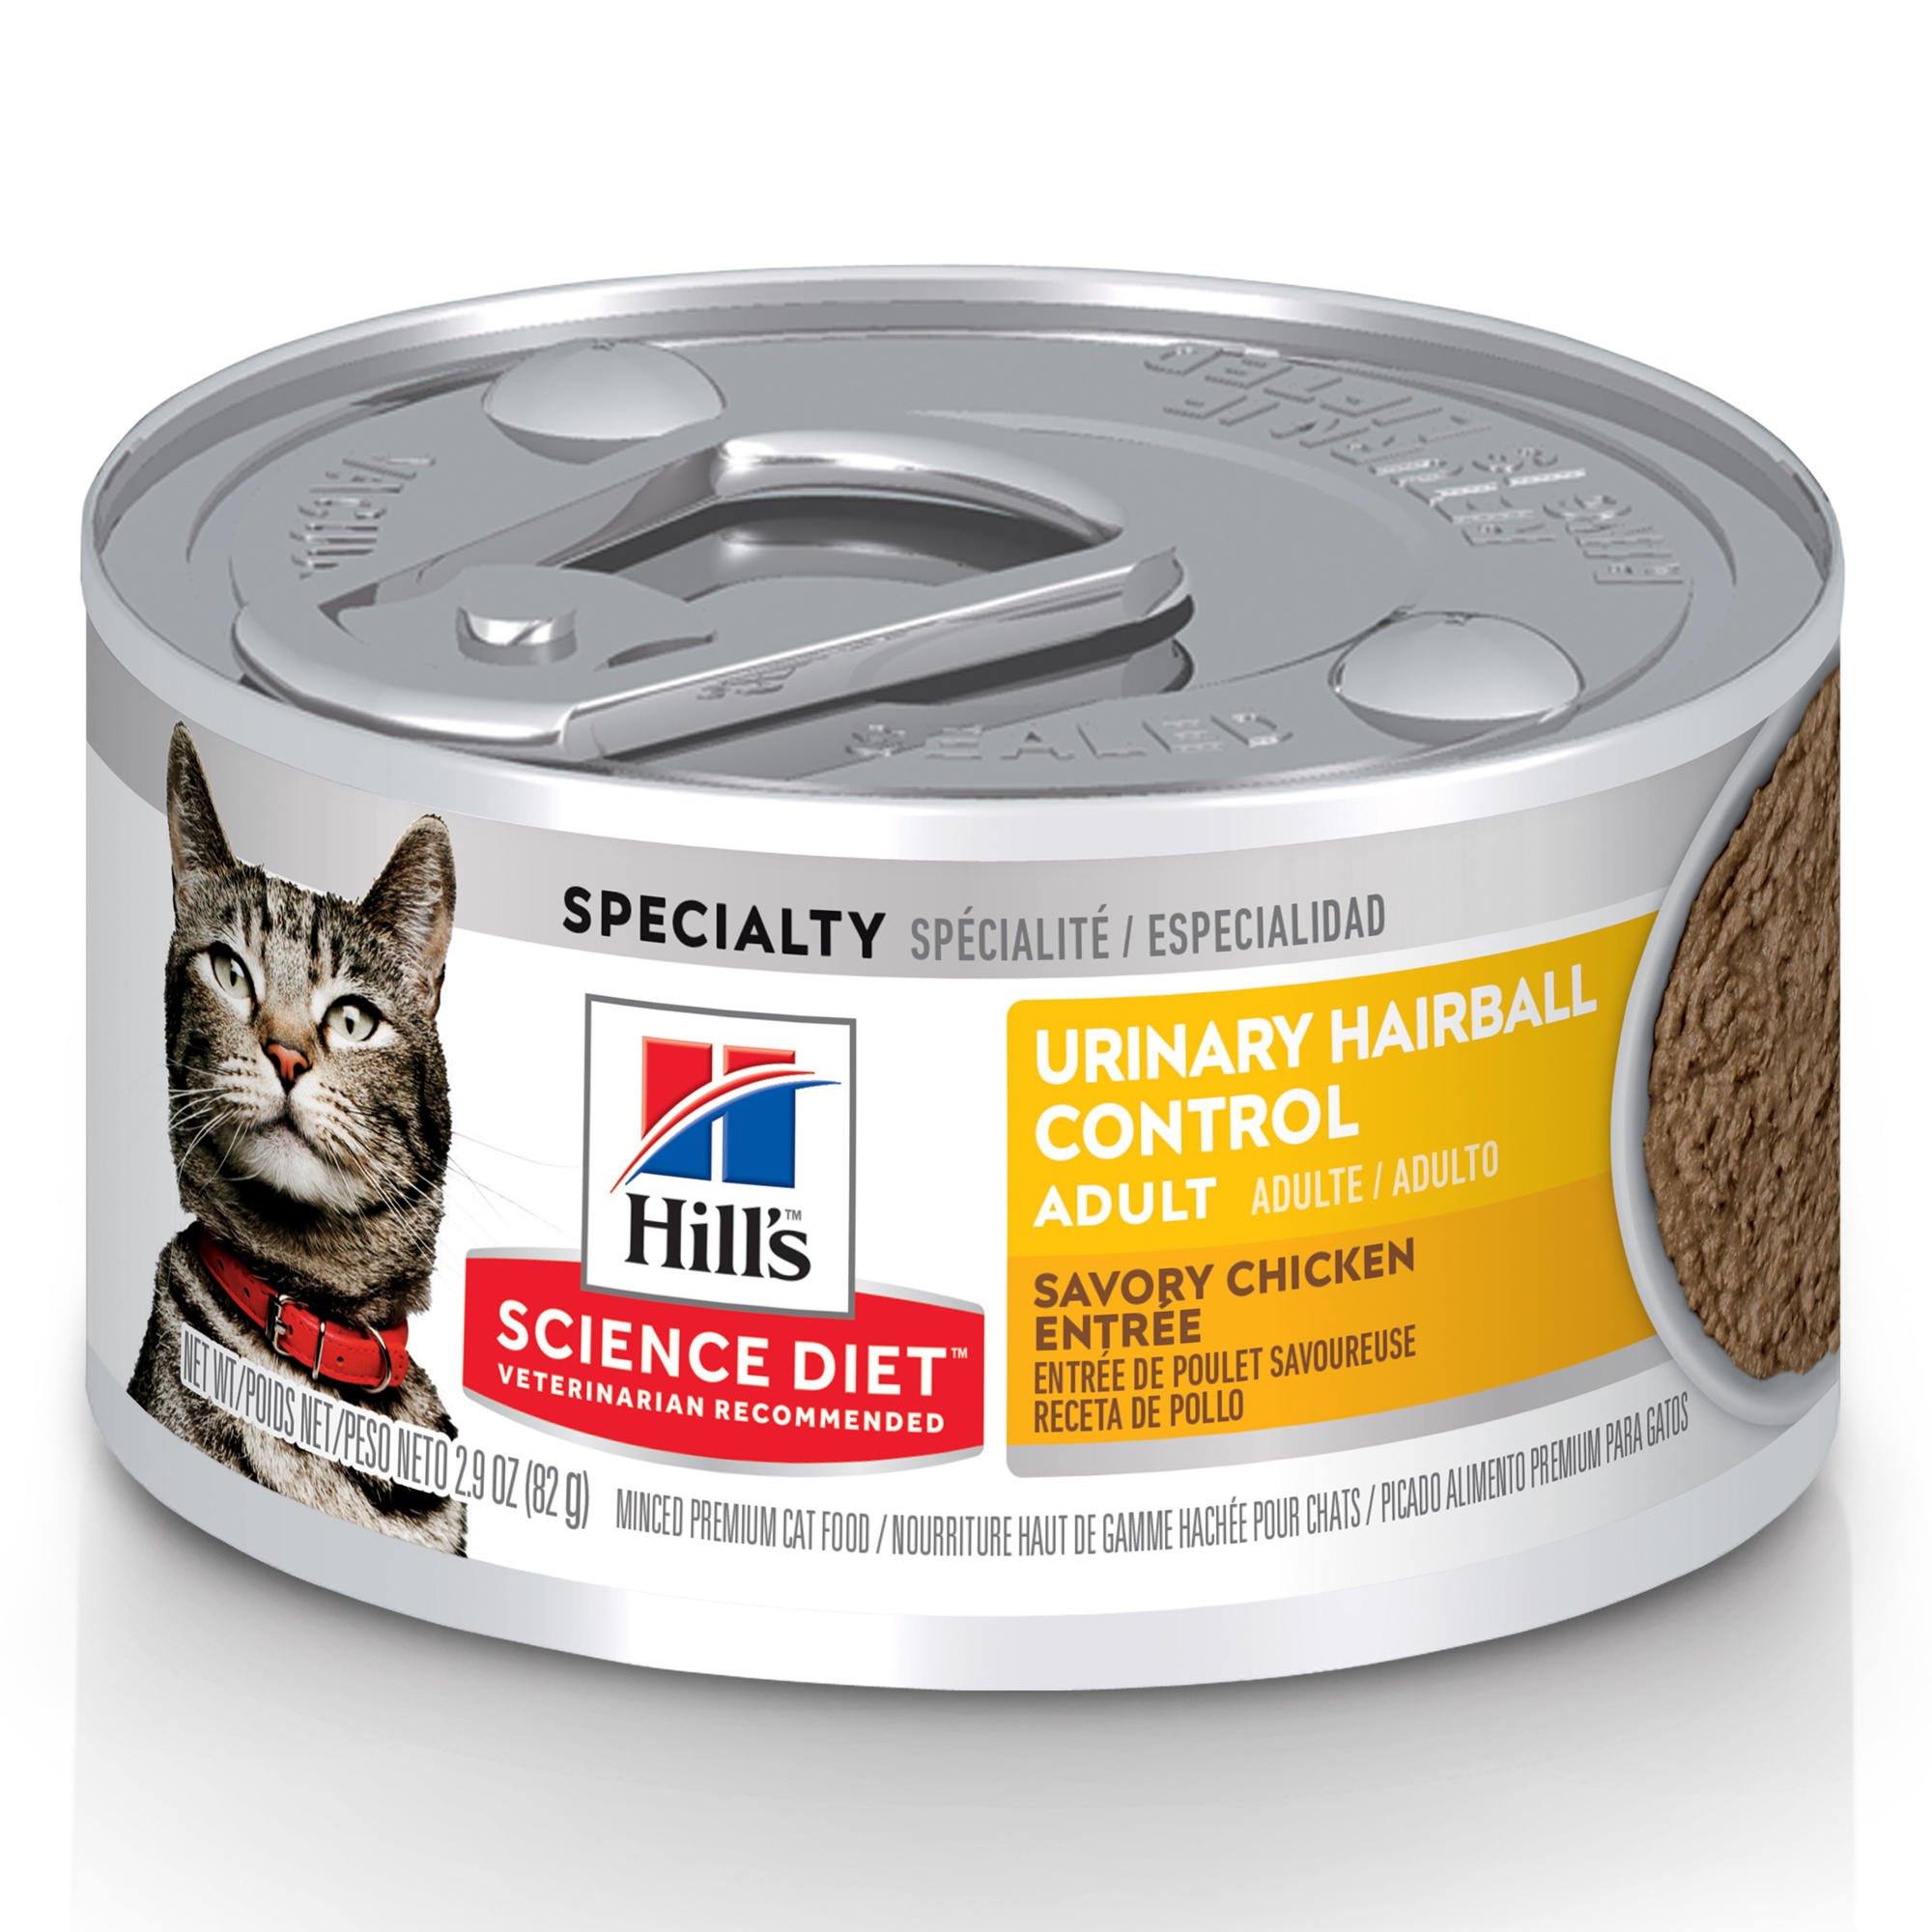 Hills Science Diet Adult Urinary Hairball Control Canned Cat Food Petco